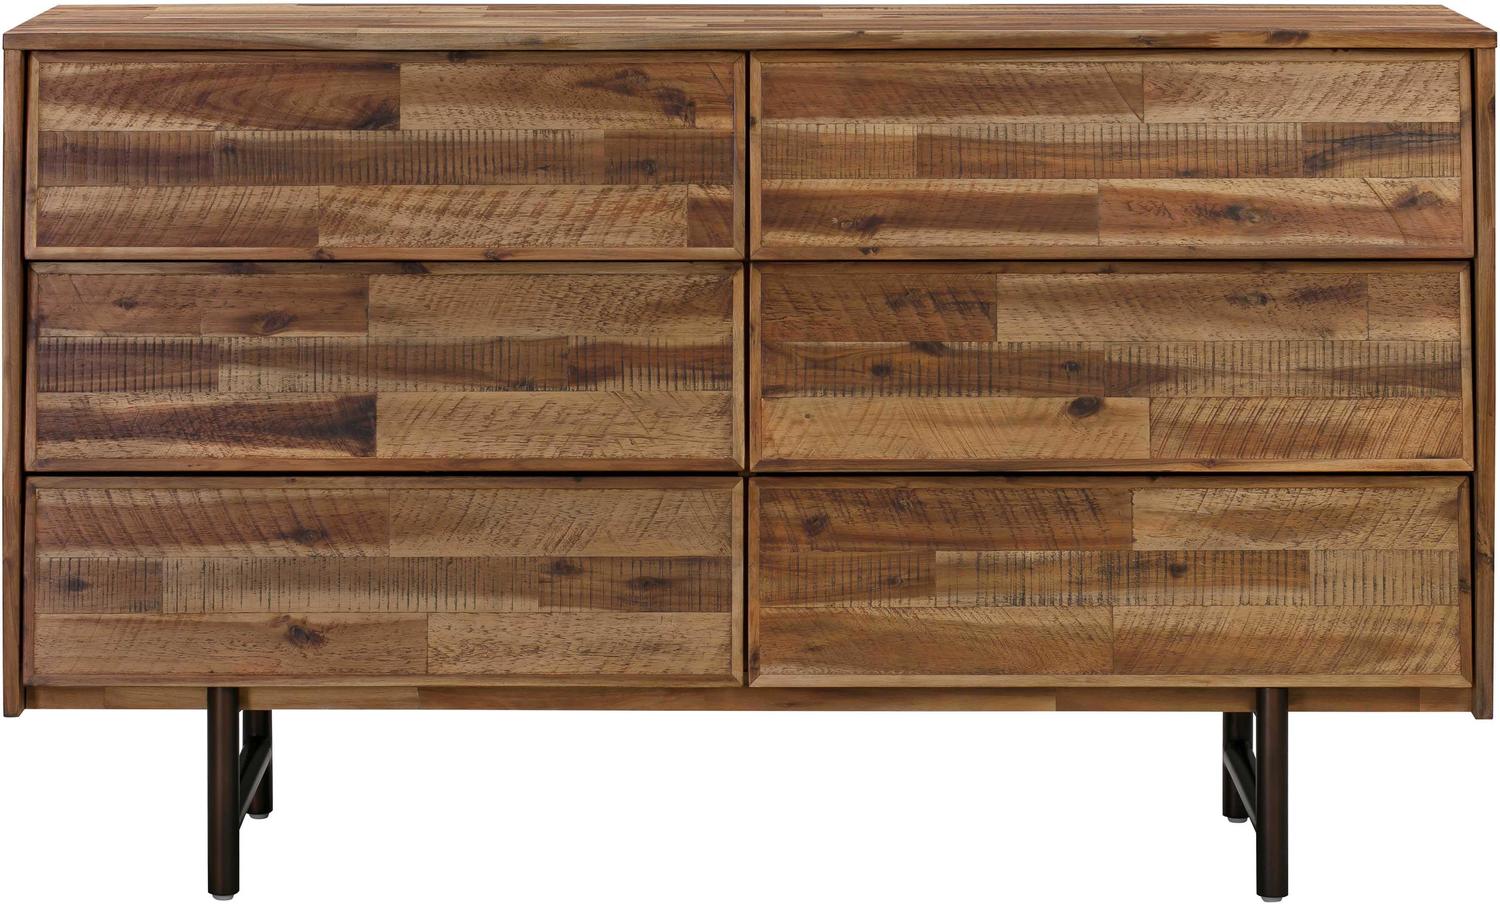 modern jewelry dresser Contemporary Design Furniture Dressers Bedroom Chests and Dressers Rustic Acacia